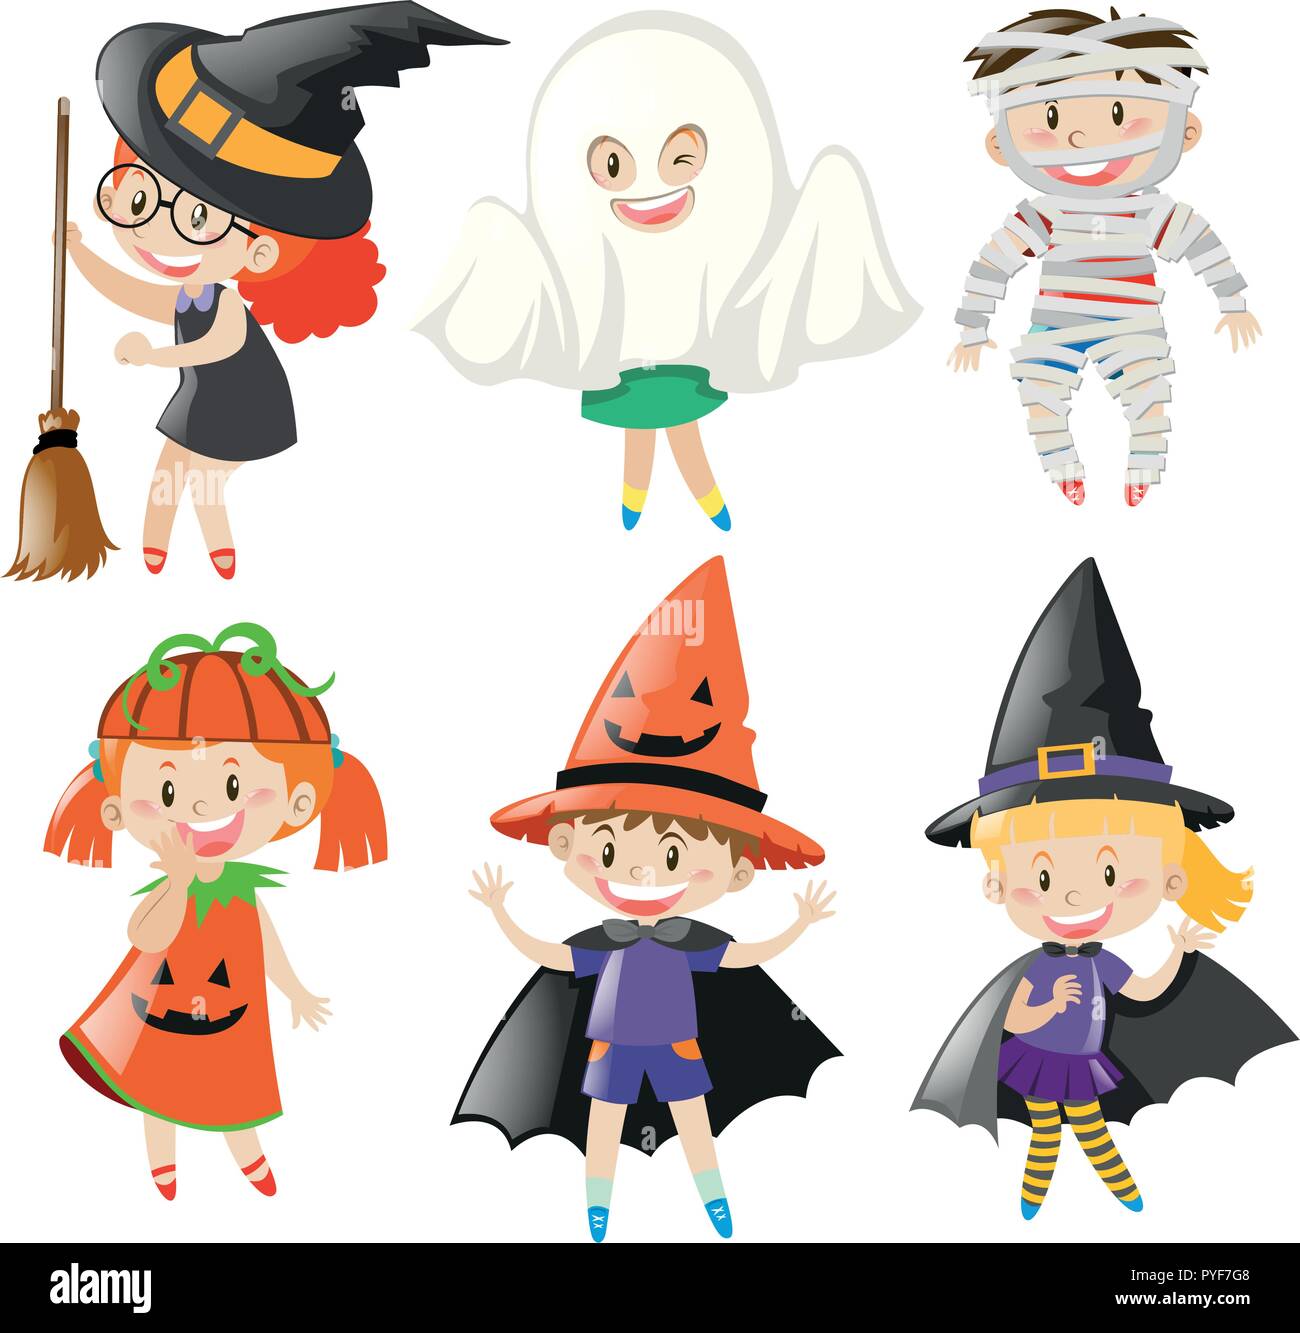 Boys and girls in halloween costumes illustration Stock Vector